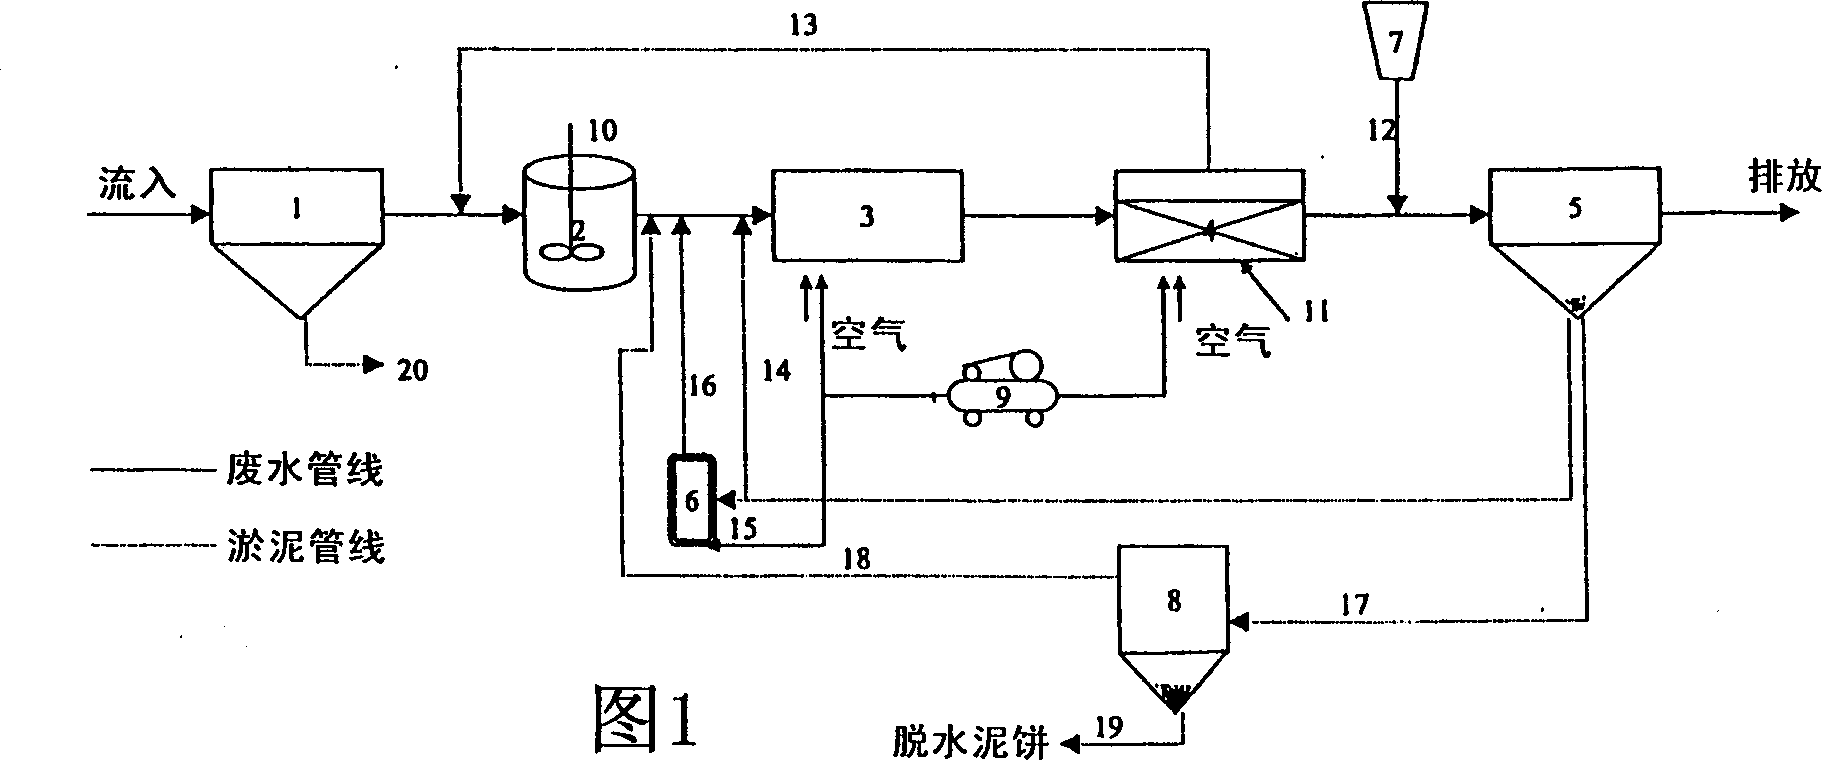 Method for biochemically treating wastewater